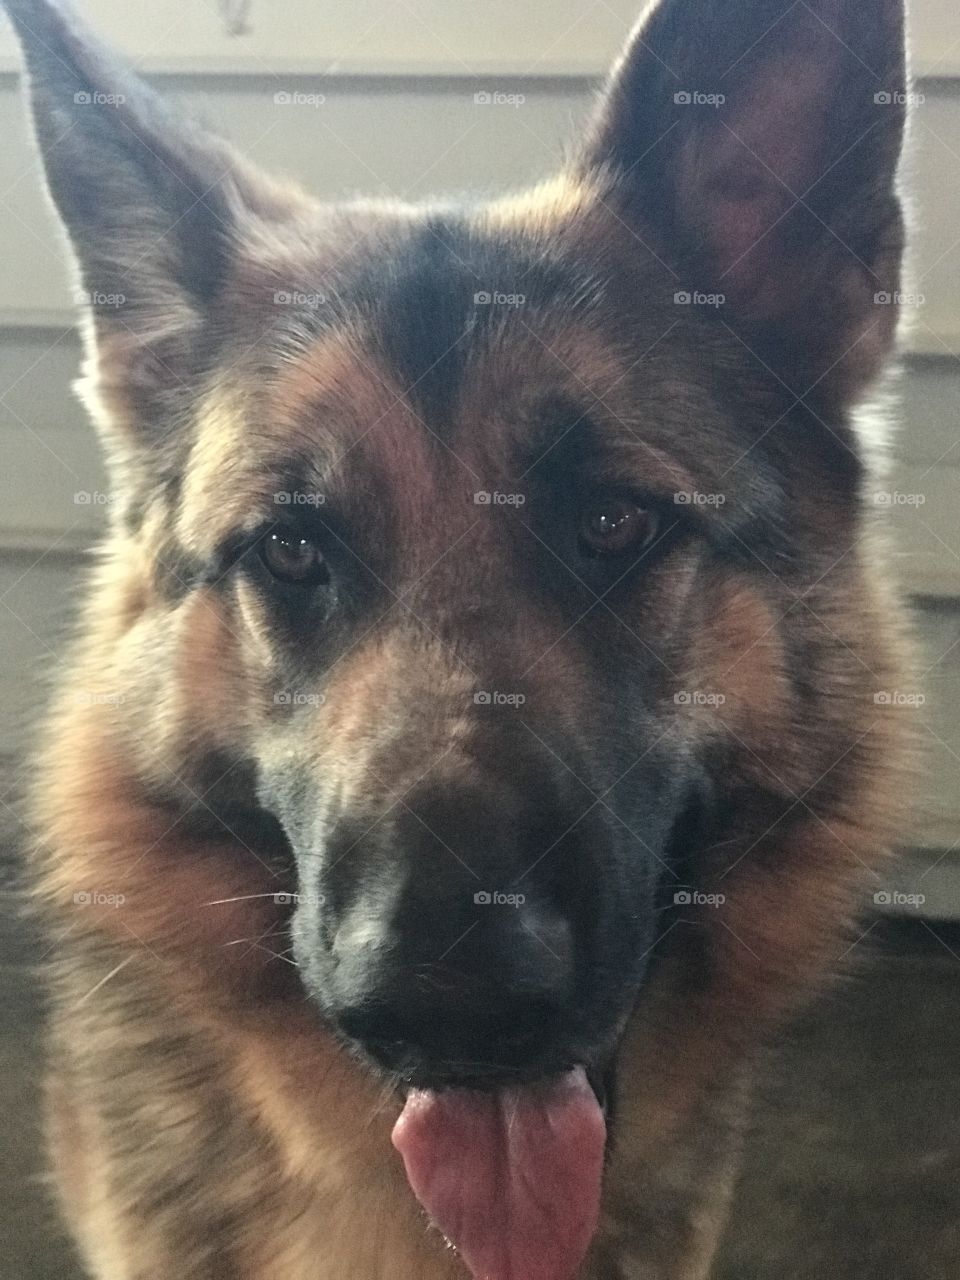 Fiona the Fierce AKA (sassy German Shepherd) she’ BIG she’s BOLD she’s TERRITORIAL and she is the PROTECTOR and DEFENDER of our home along with her furry sister. She is ferocious and loyal. Don’t underestimate a German Shepherd. They save us 